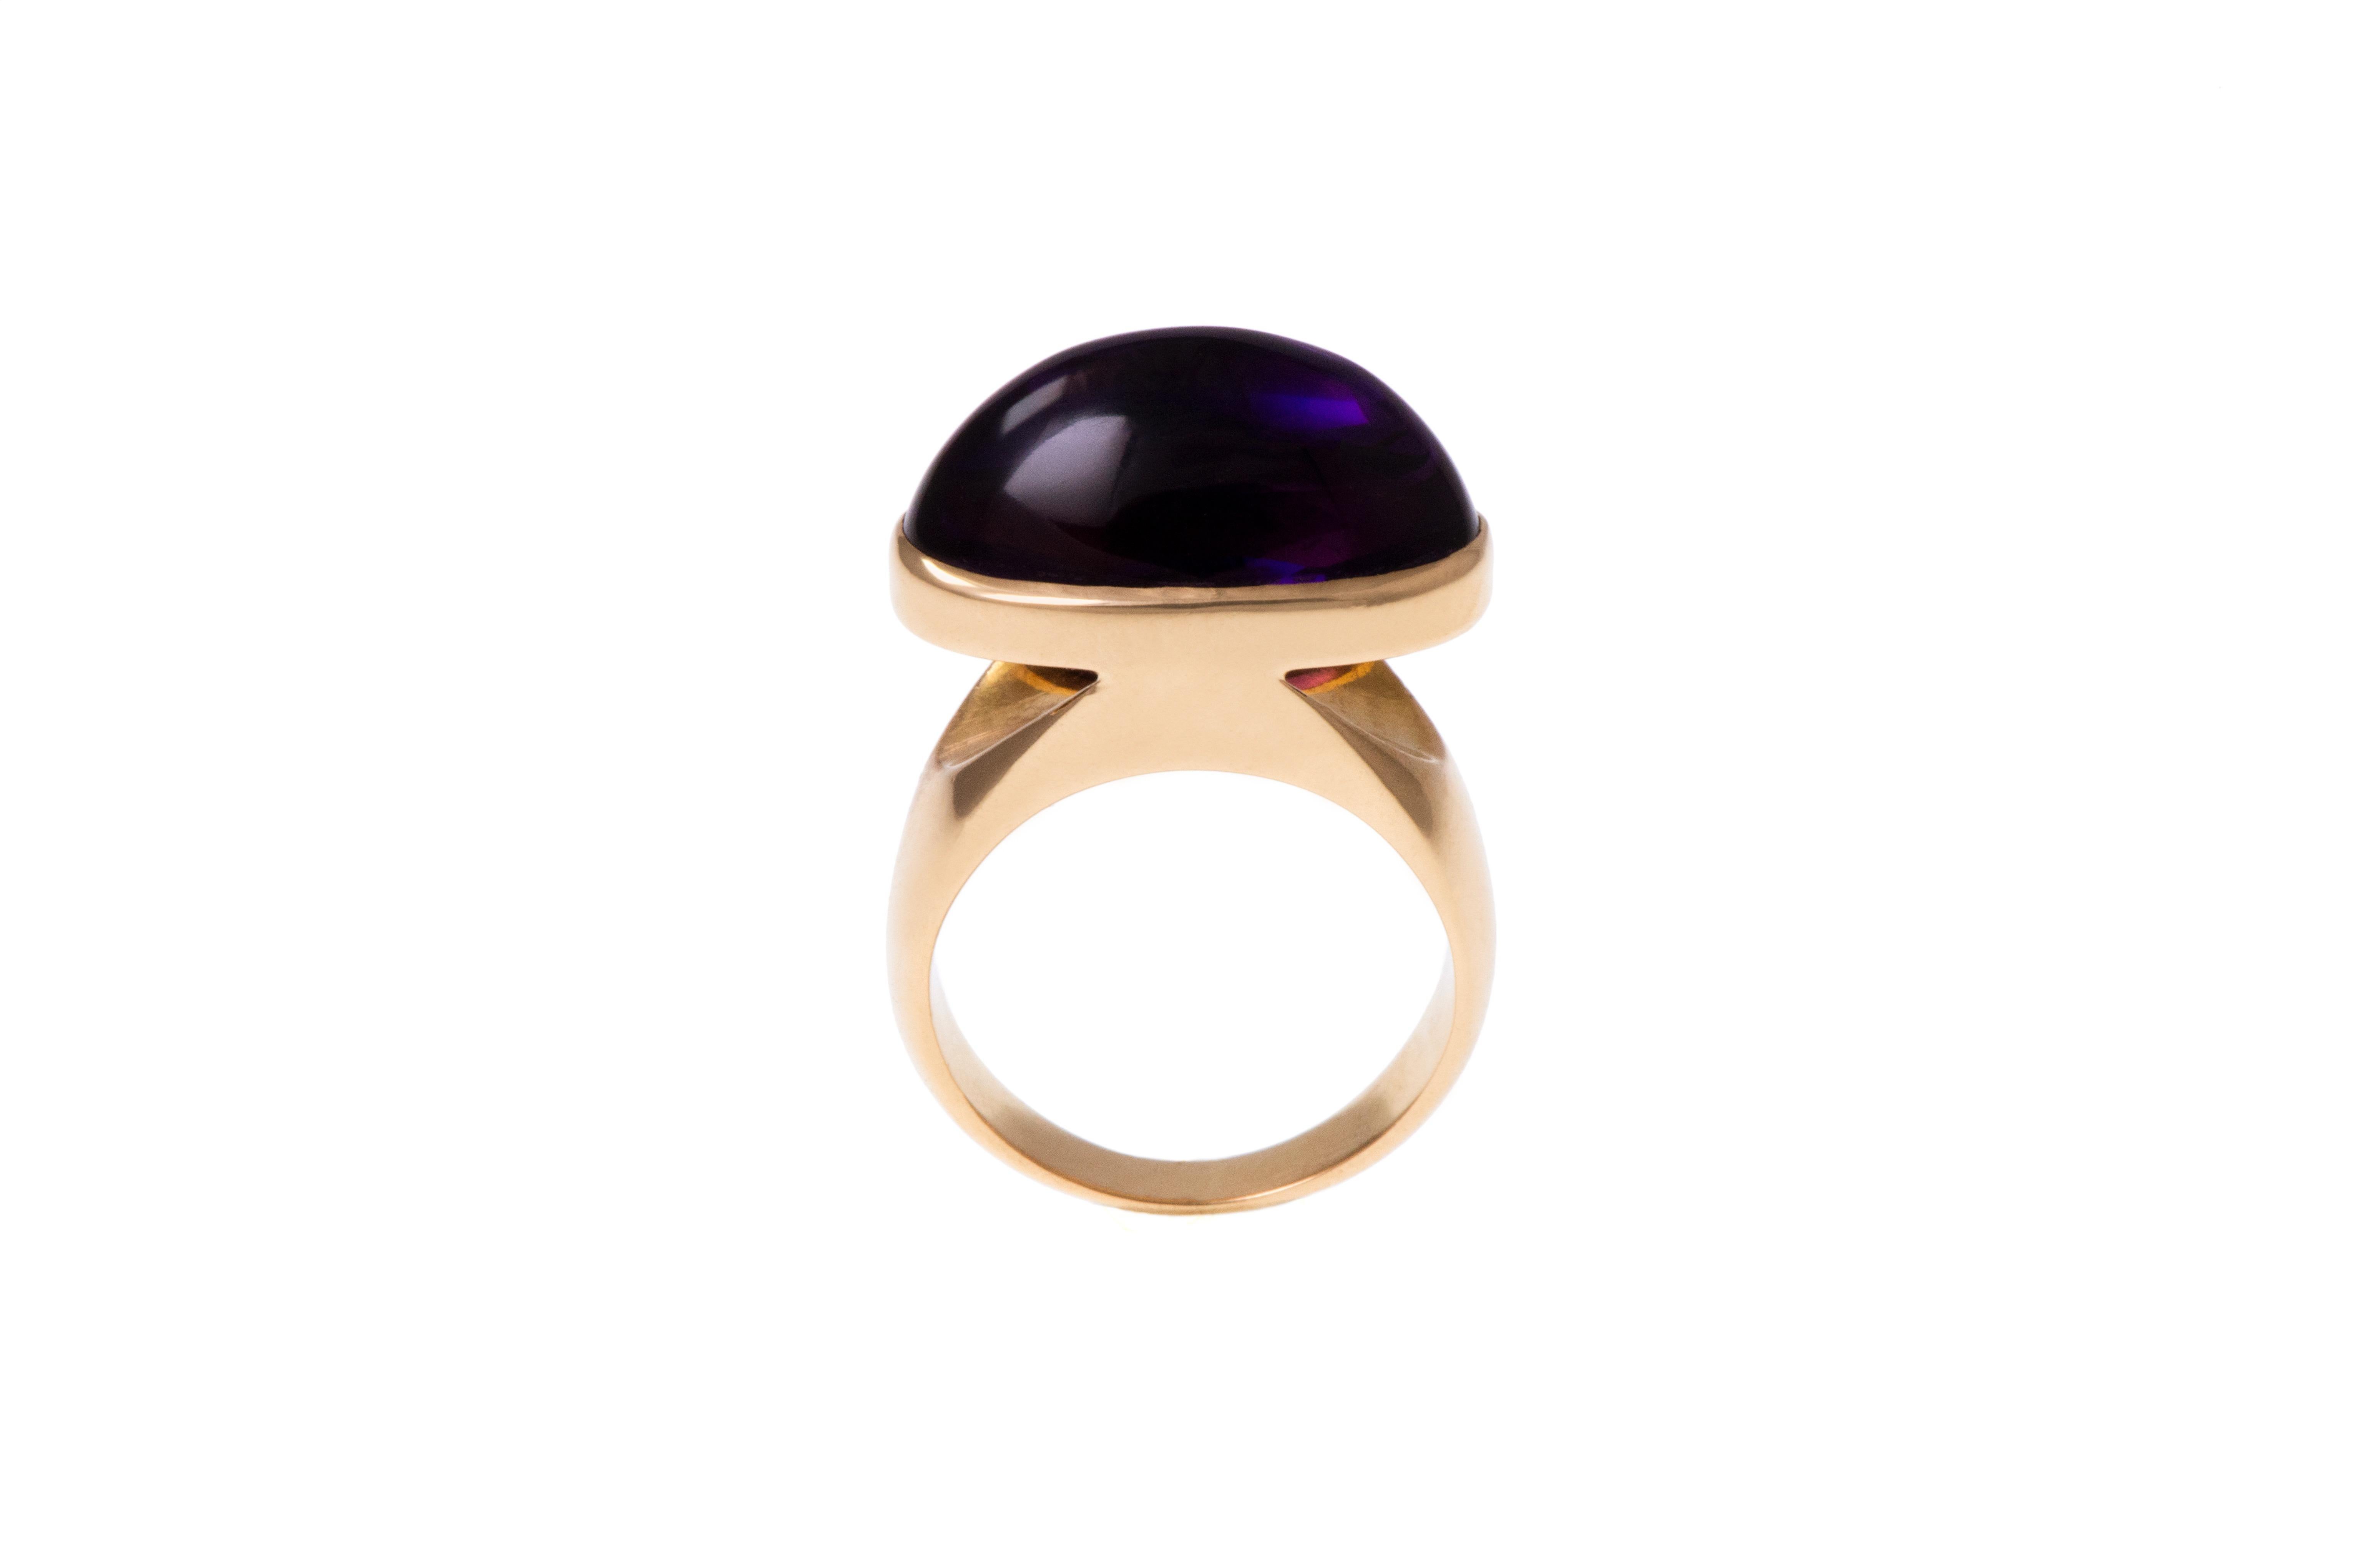 A lively 18-karat gold ring with a beautiful cabochon amethyst designed by Tuk Fischer for Georg Jensen, Circa 1970. The ring is stamped Georg Jensen, Denmark 18k, and numbered 1096.
It measures a size 6 and is sizable. More precisely, the ring